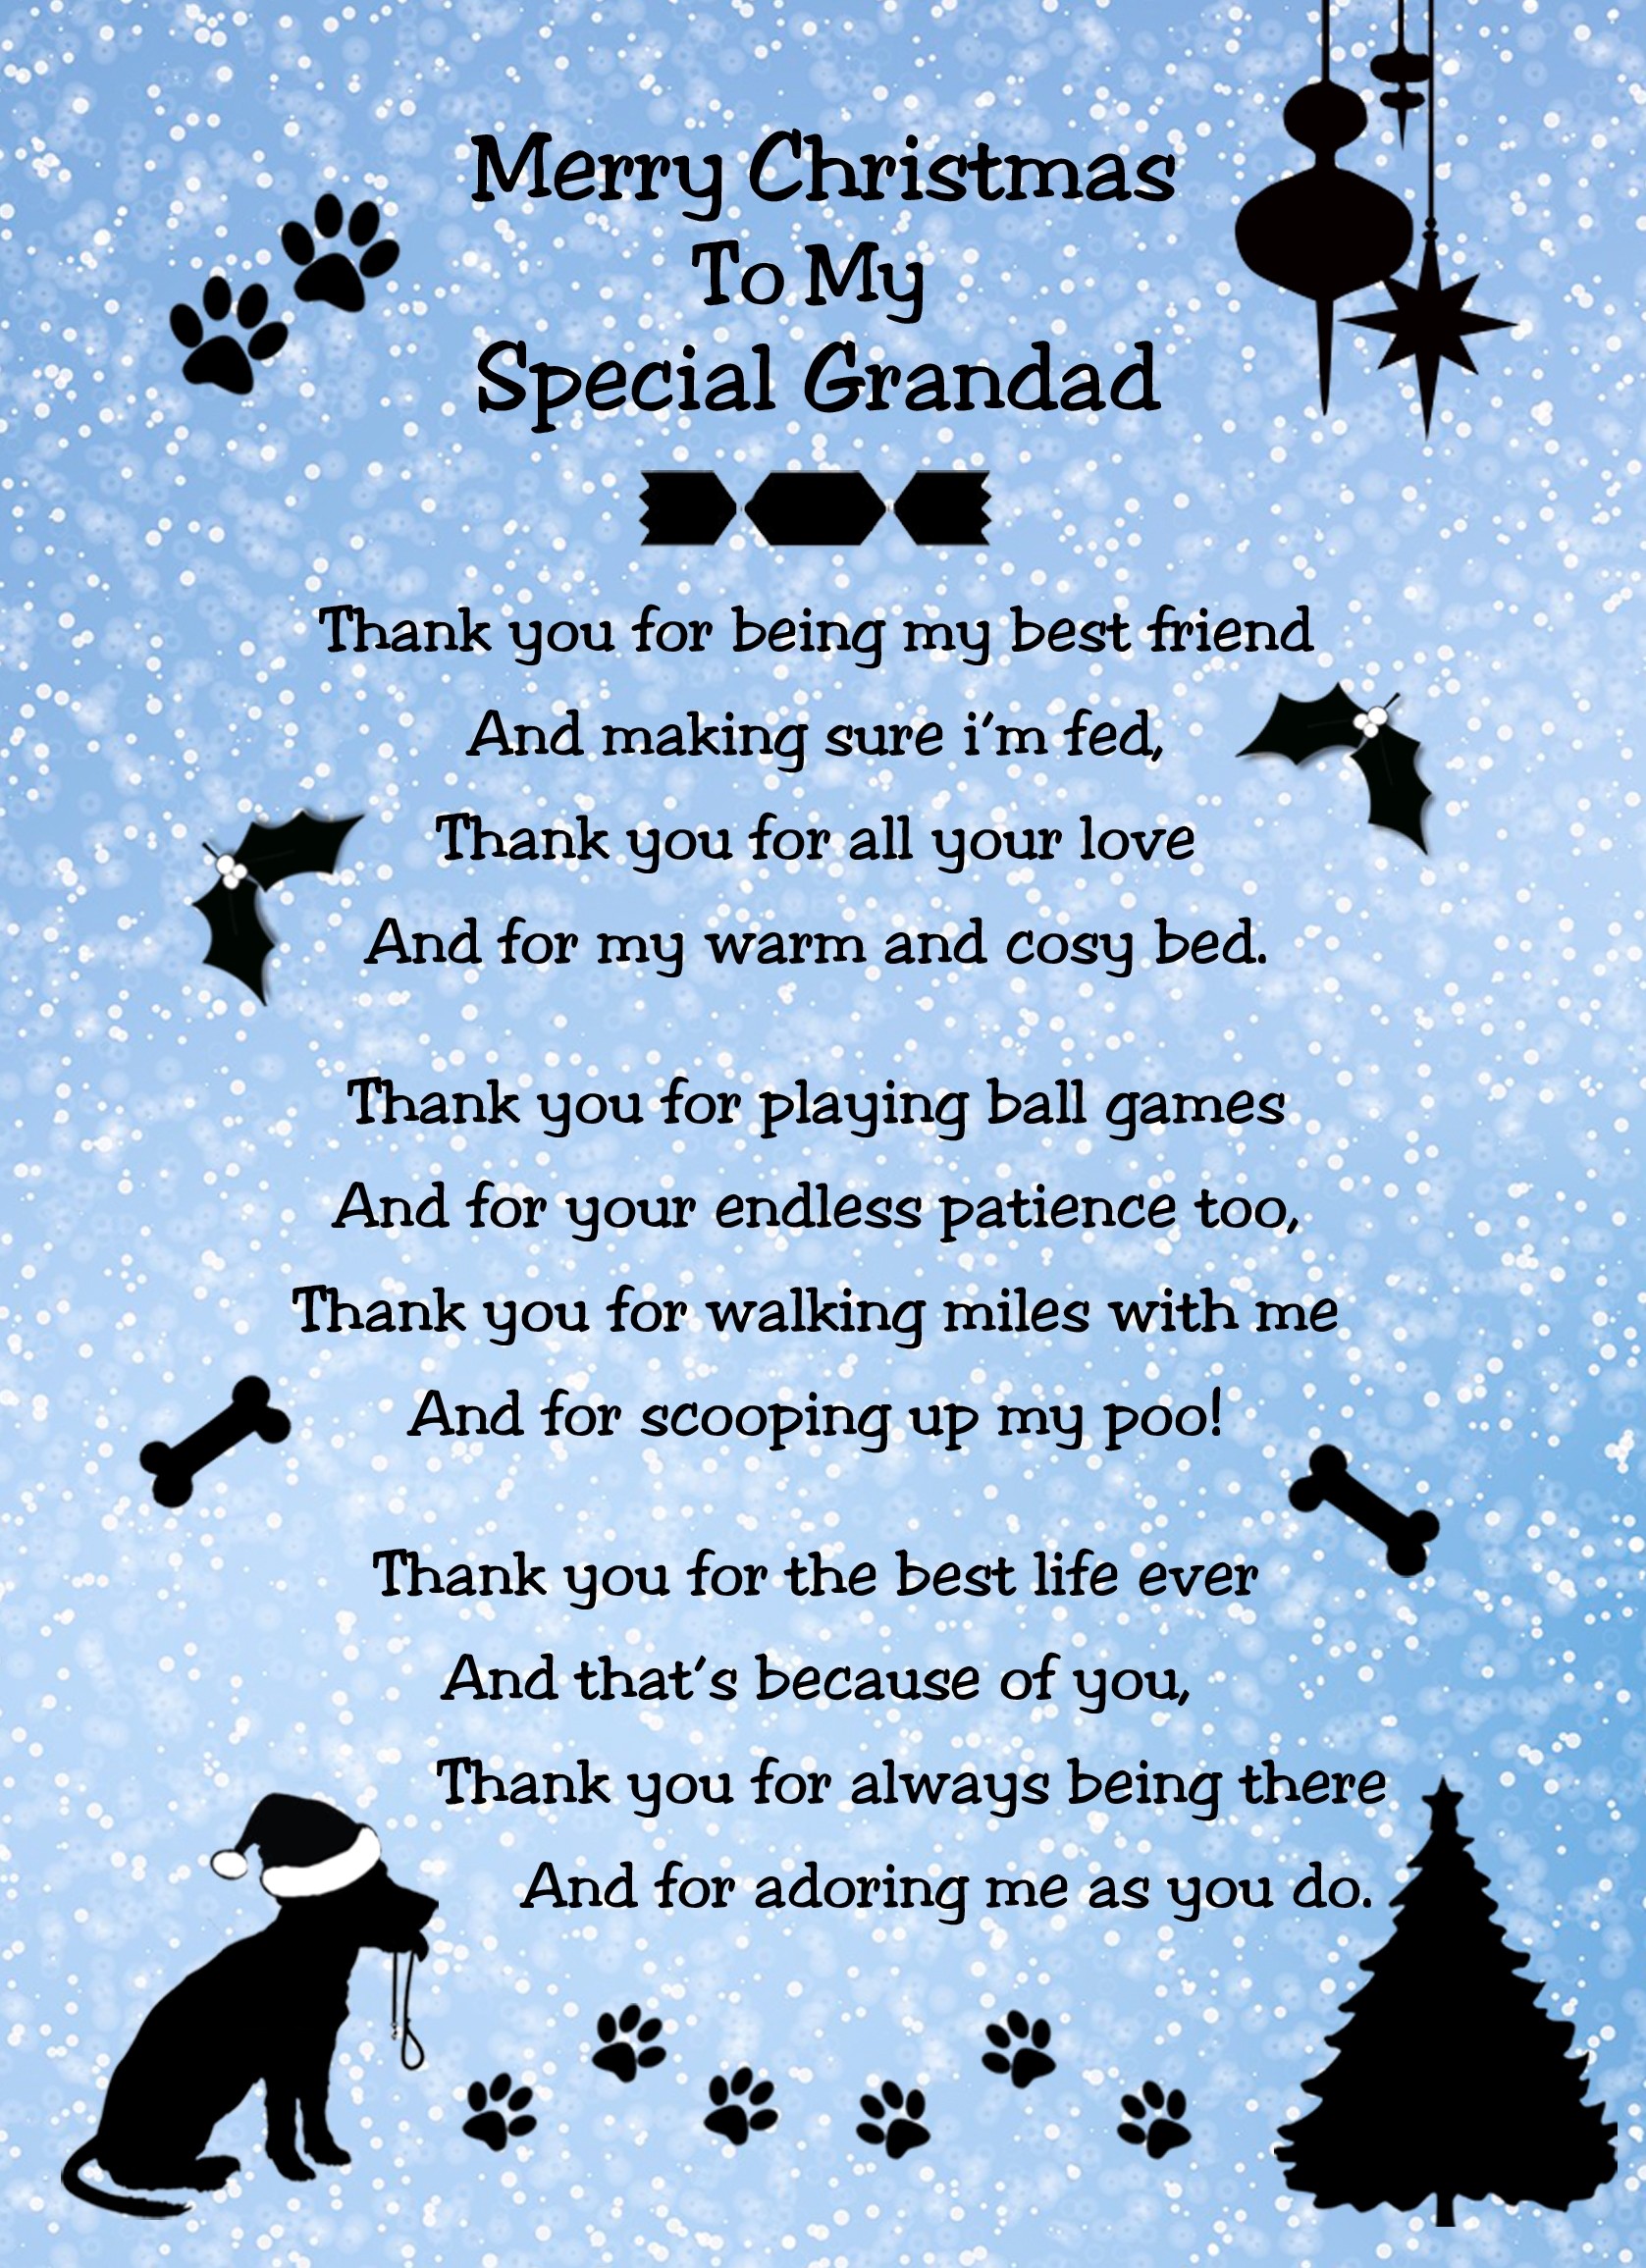 From The Dog Verse Poem Christmas Card (Special Grandad, Snow, Merry Christmas)